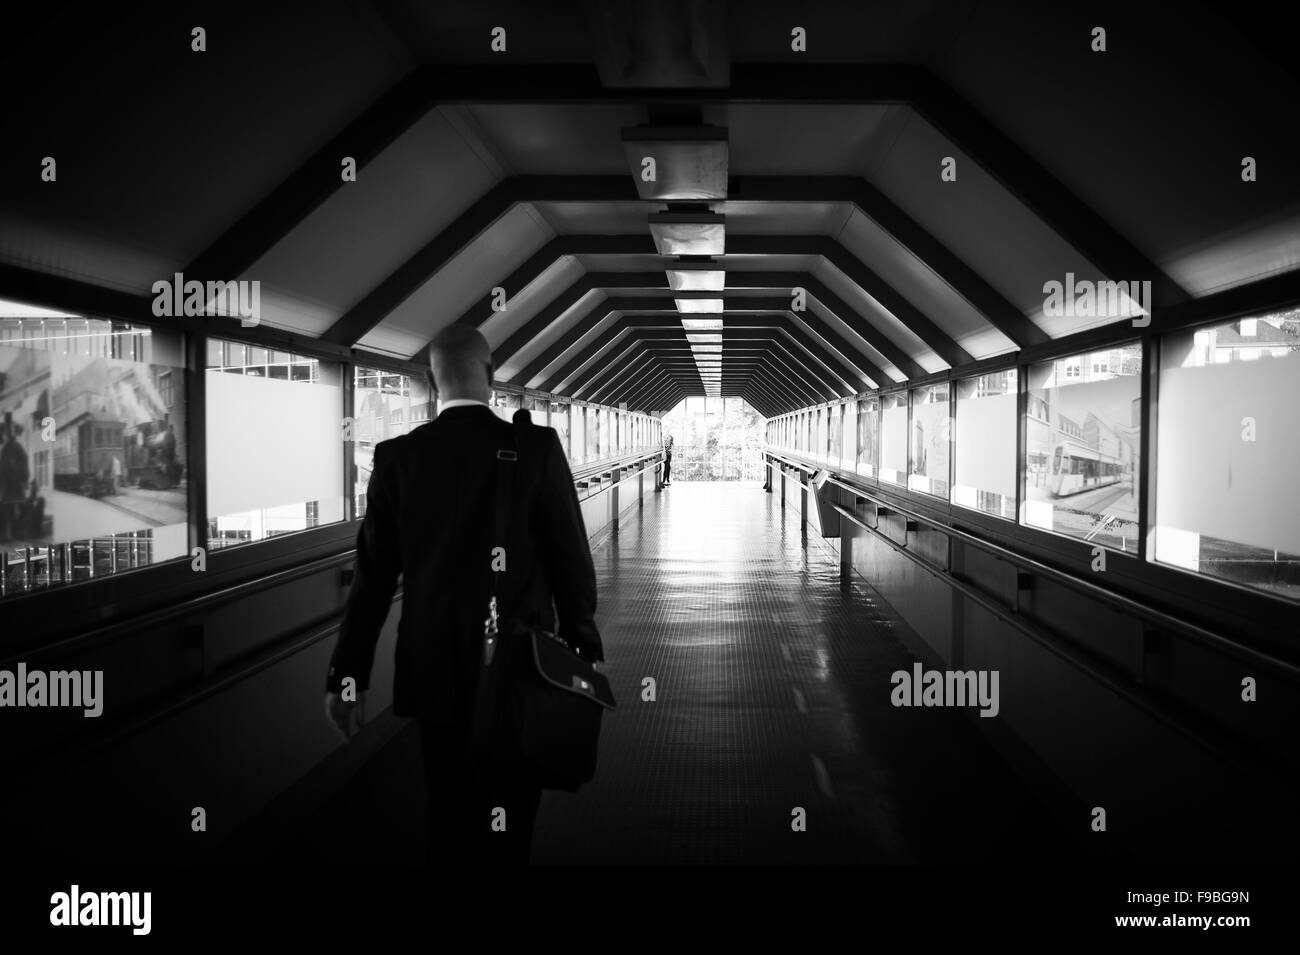 A man with a suitcase walking through the tunnel Stock Photo